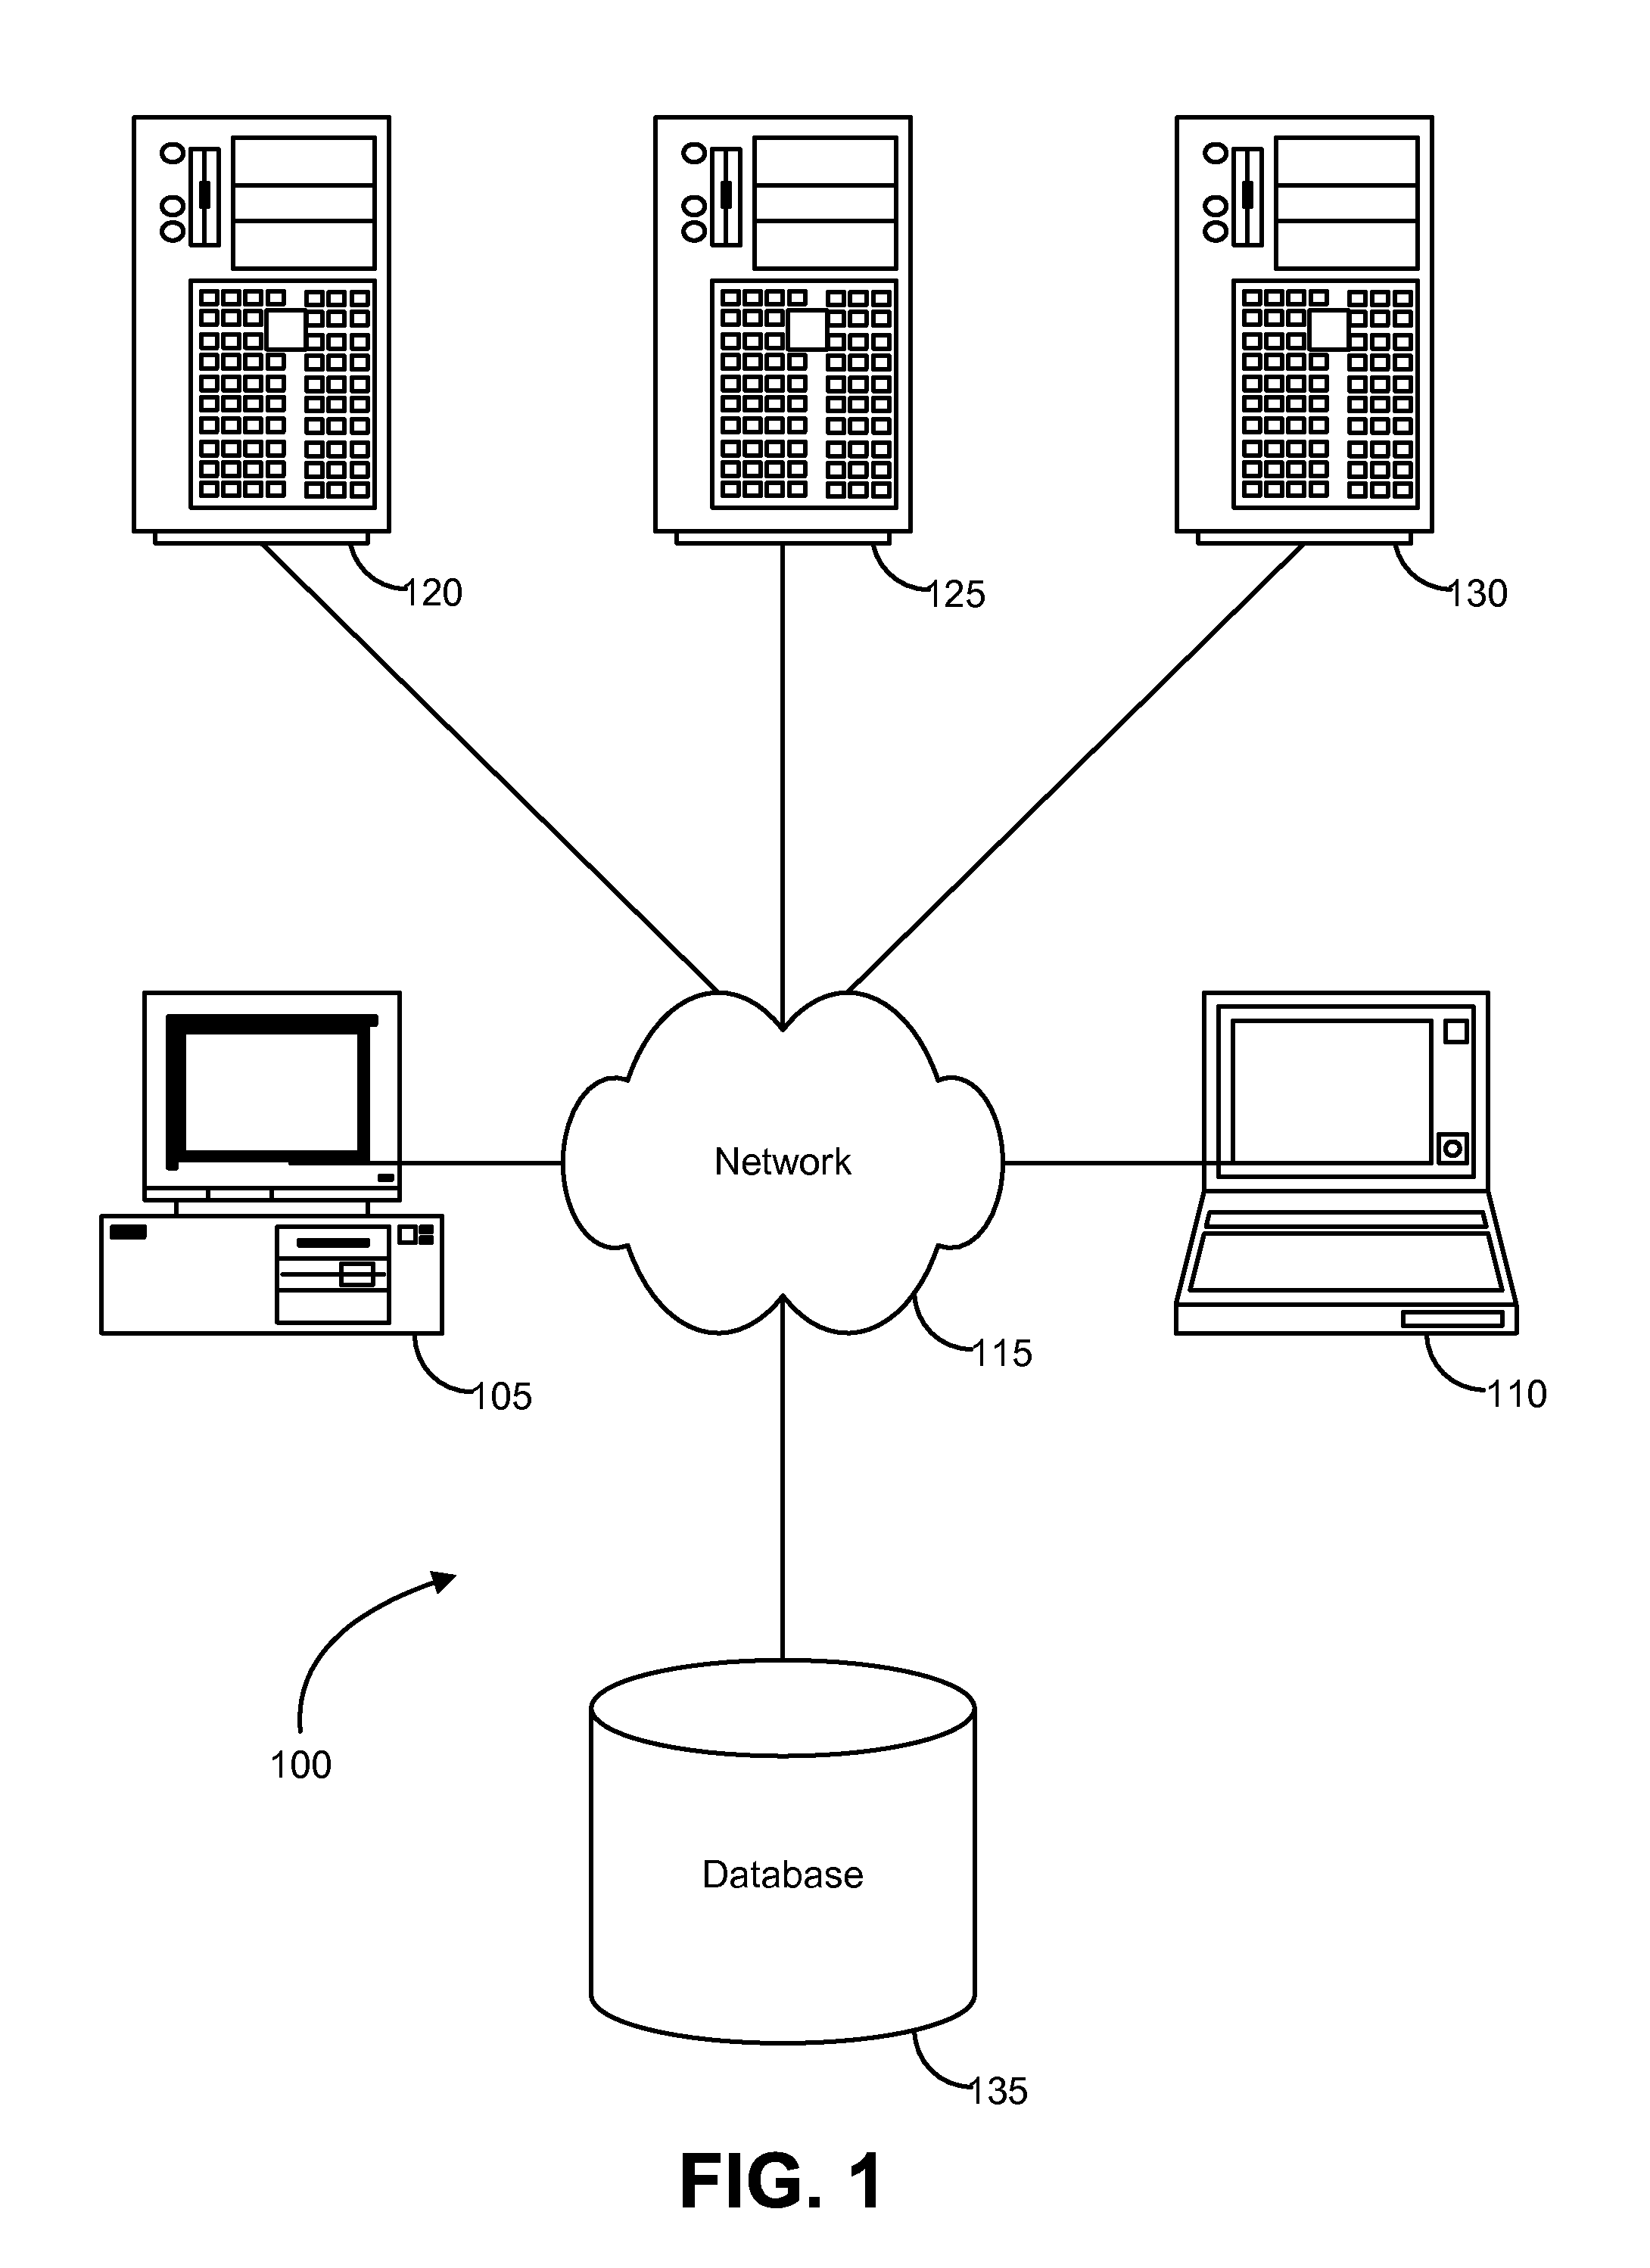 Method for fair share allocation in a multi-echelon service supply chain that considers supercession and repair relationships